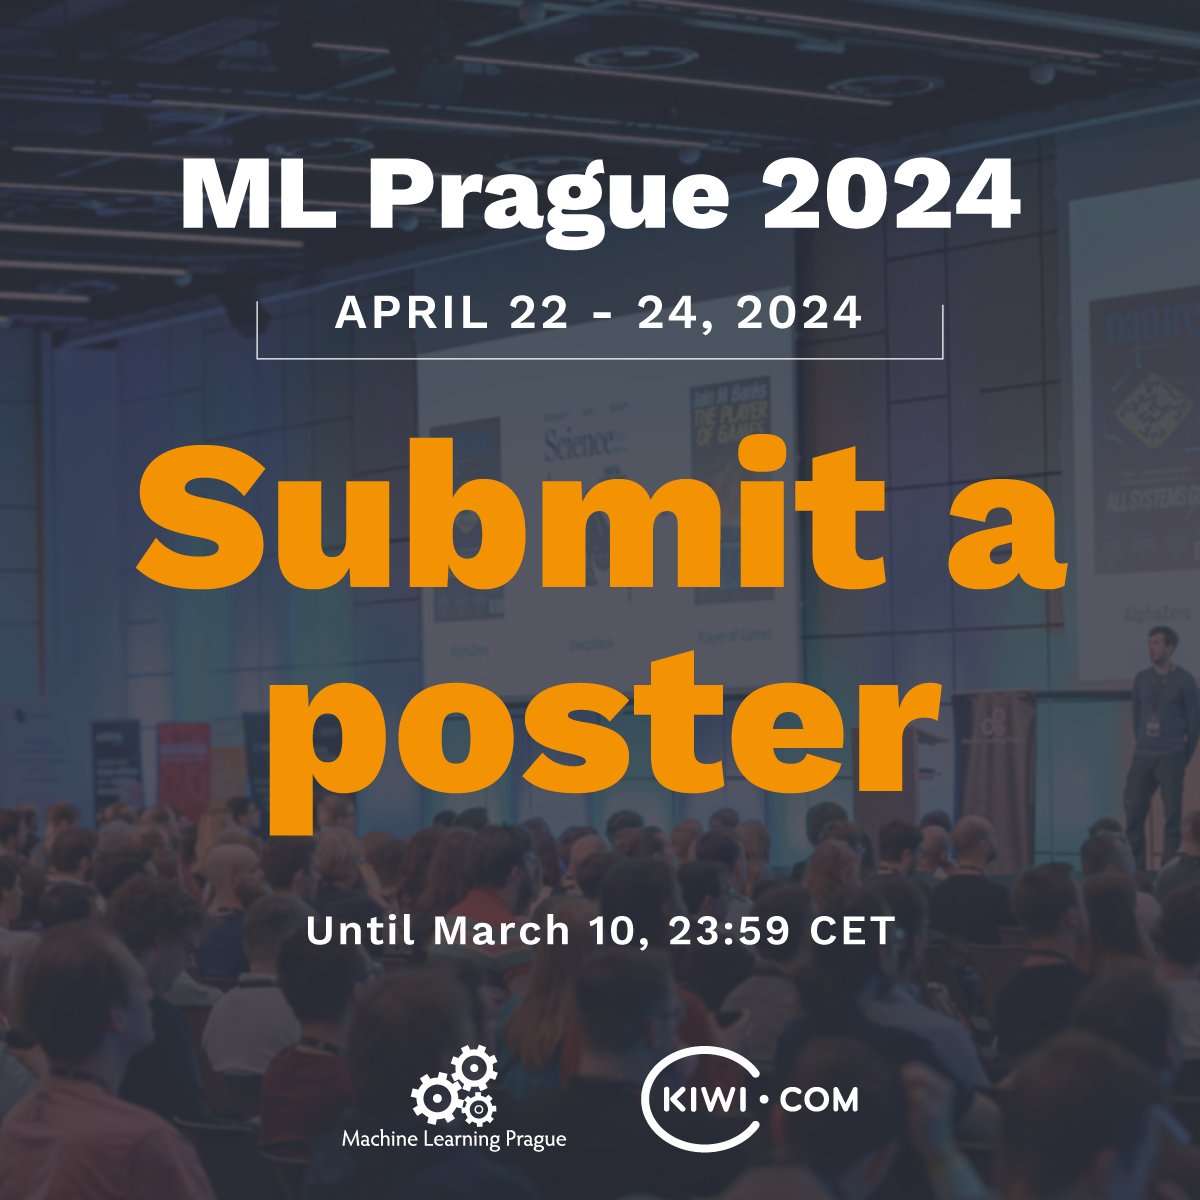 🌎🔎 We're searching for scientists, researchers, and engineers who would like to present their achievements in academic research or commercial applications of machine learning. 🫵 Is that you? 🫵 Submit a poster proposal before March 10, 2024. You can learn more about the